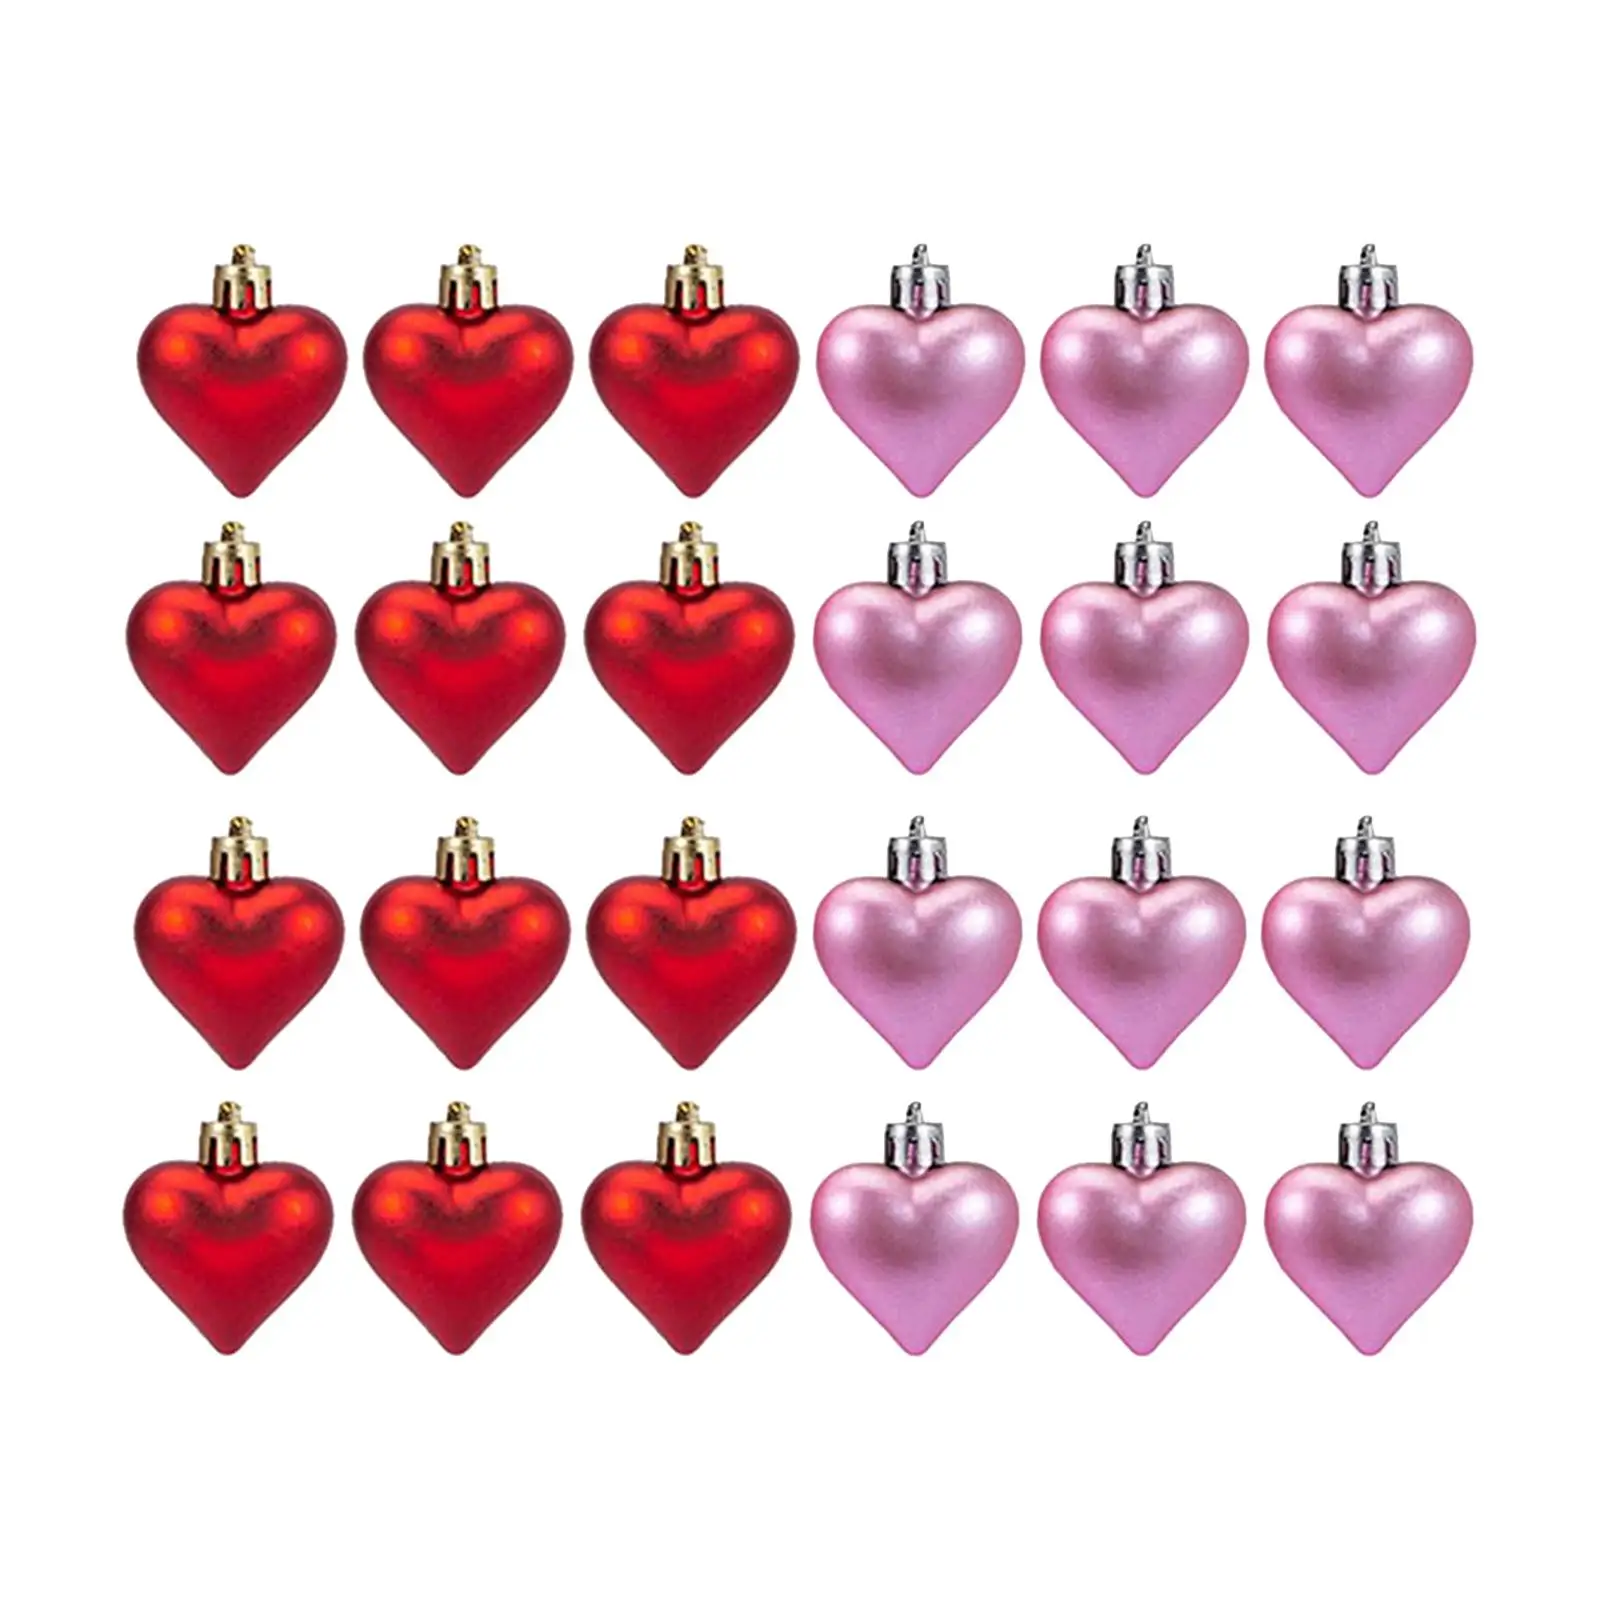 24x Valentine`s Day Heart Ornaments Pendant Romantic Hanging Decorations for Hotel Engagement Home Anniversary Christmas Tree